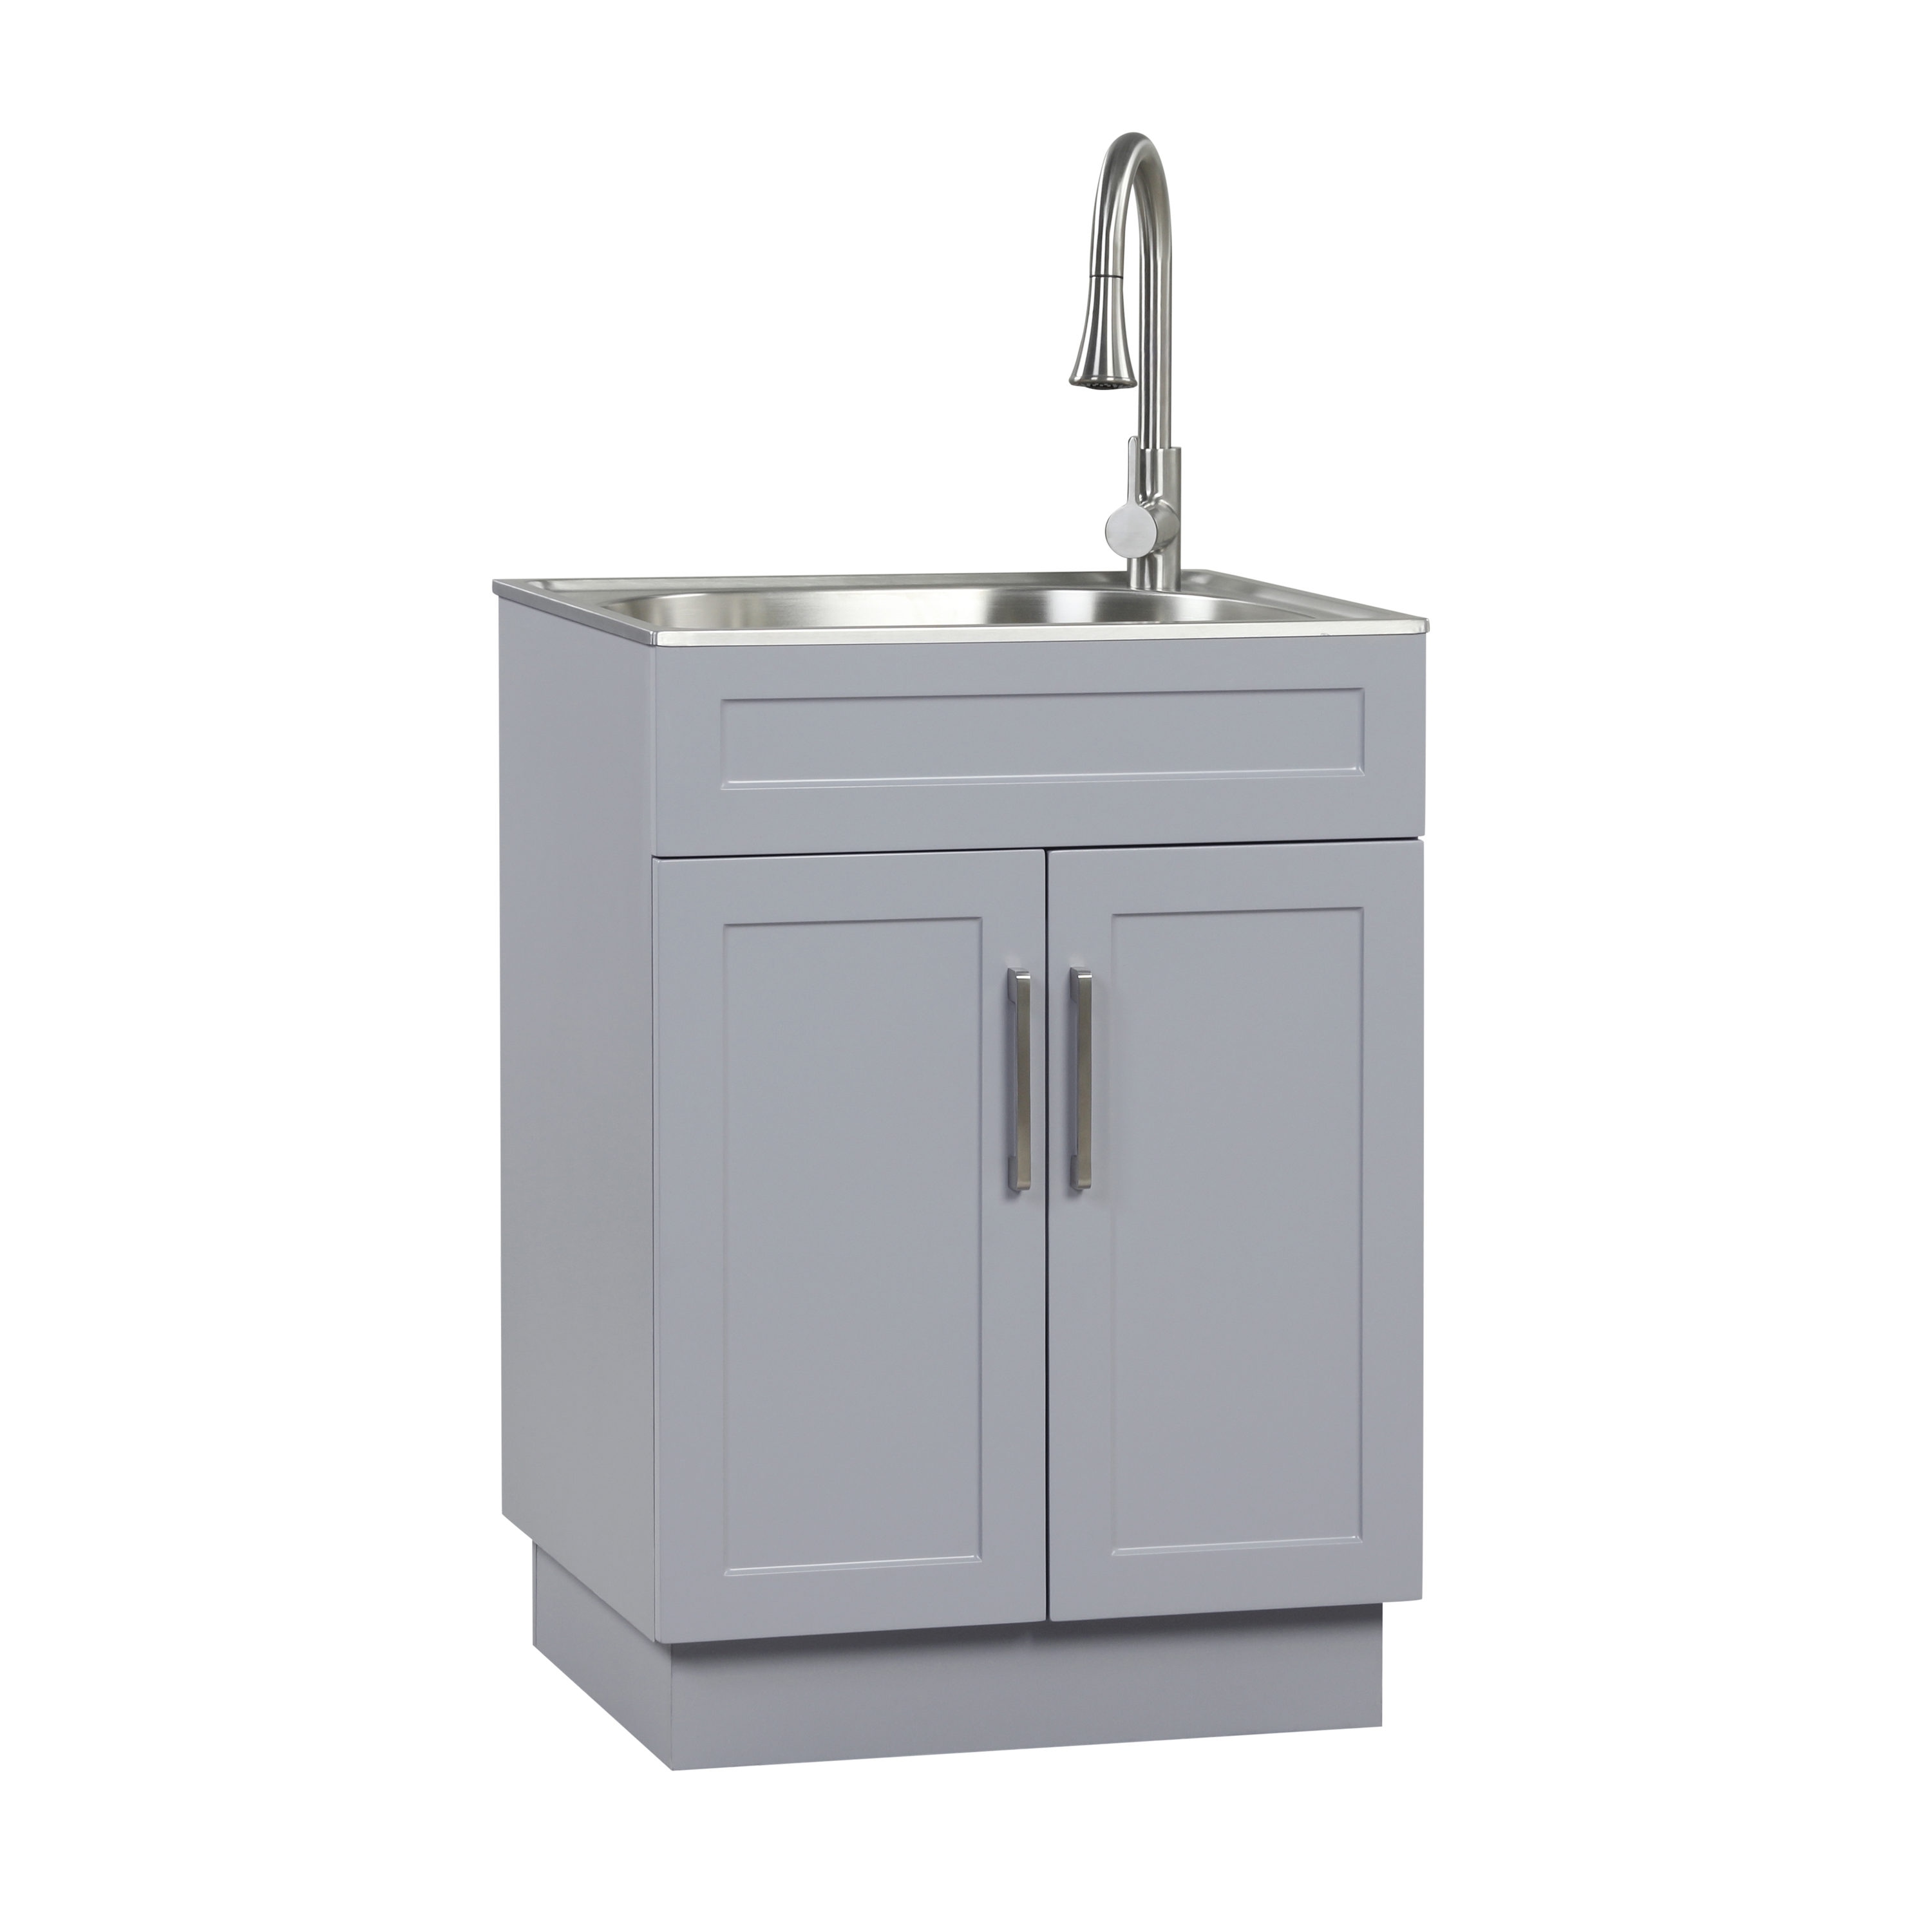 White Laundry Utility Cabinet W Stainless Steel Sink And Faucet Combo